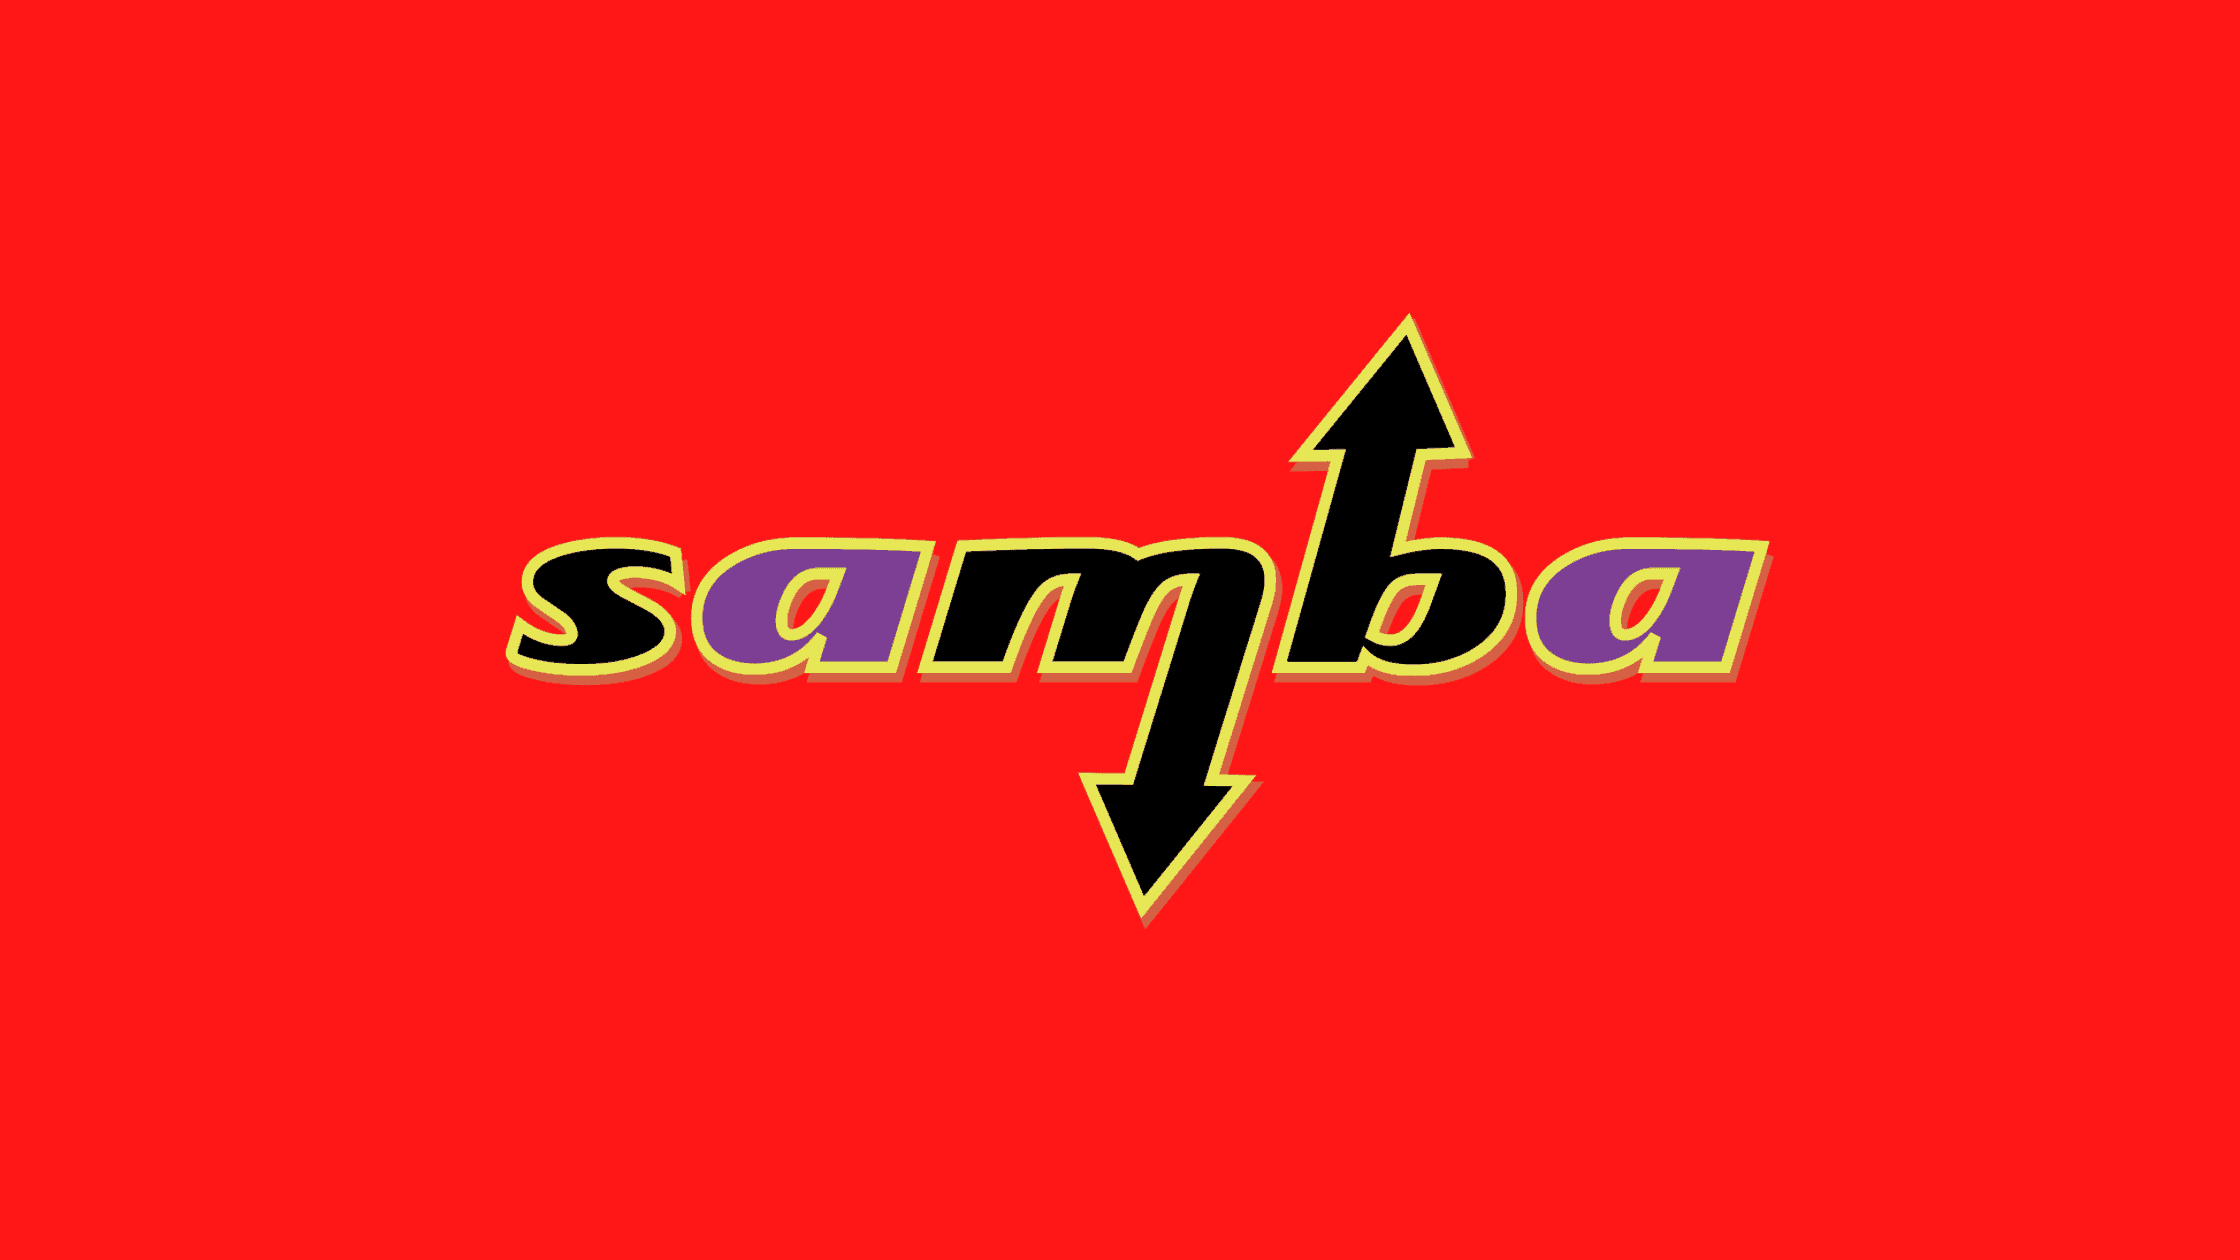 How To Fix The 4 High Severity Vulnerabilities In Samba